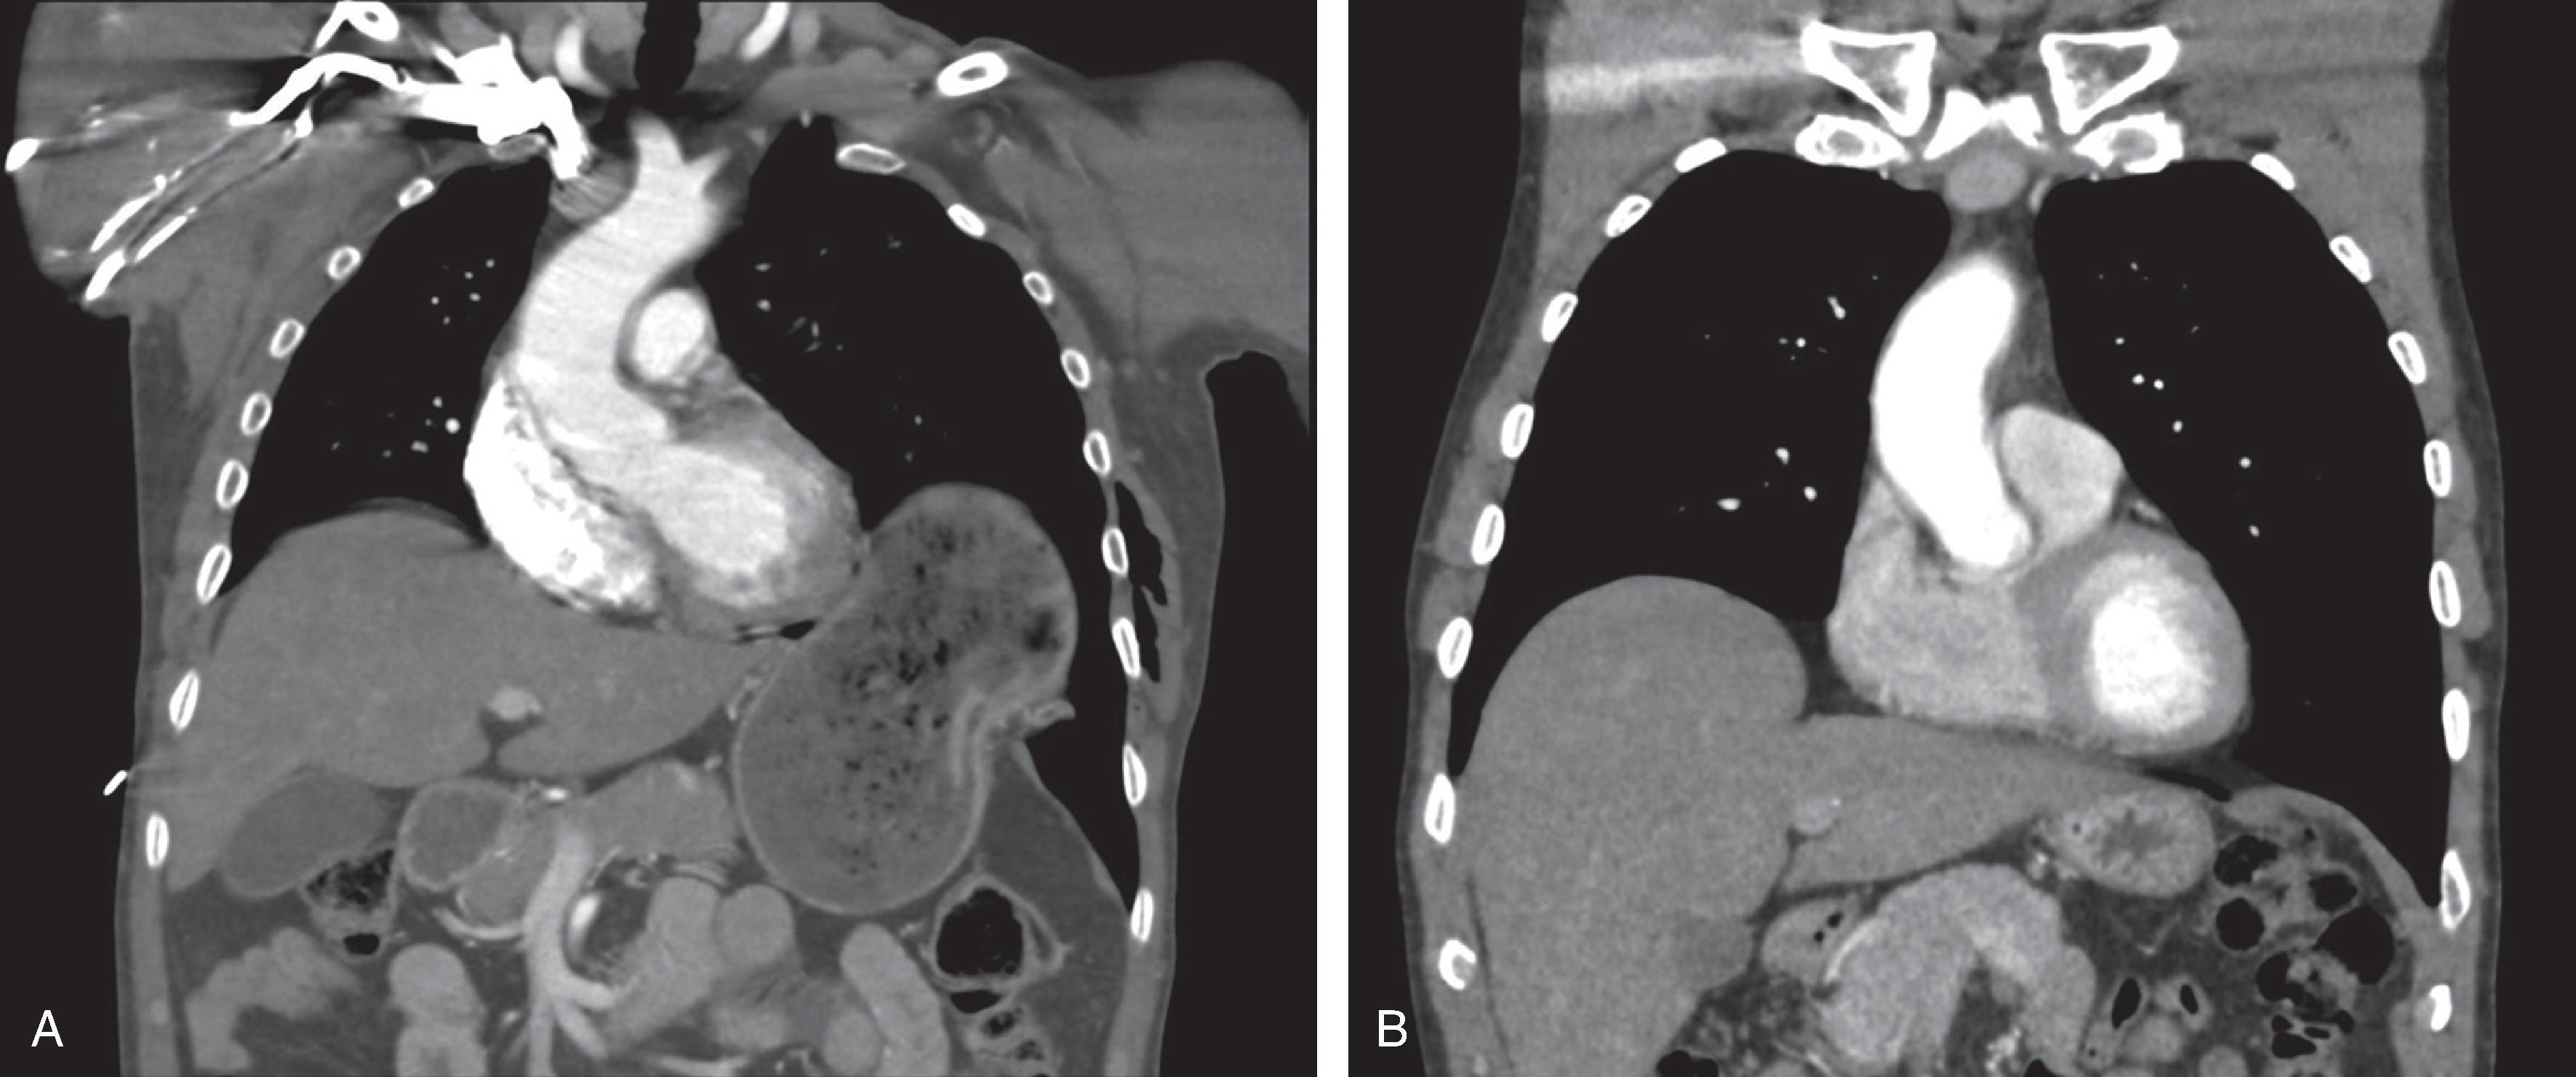 FIG. 5, (A) Collar sign. A waistlike constriction of the stomach herniated through a defect in the left hemidiaphragm is seen on a coronal reconstruction image. (B) Hump sign. Focal bulging of the right hemidiaphragm due to herniation of the liver parenchyma.